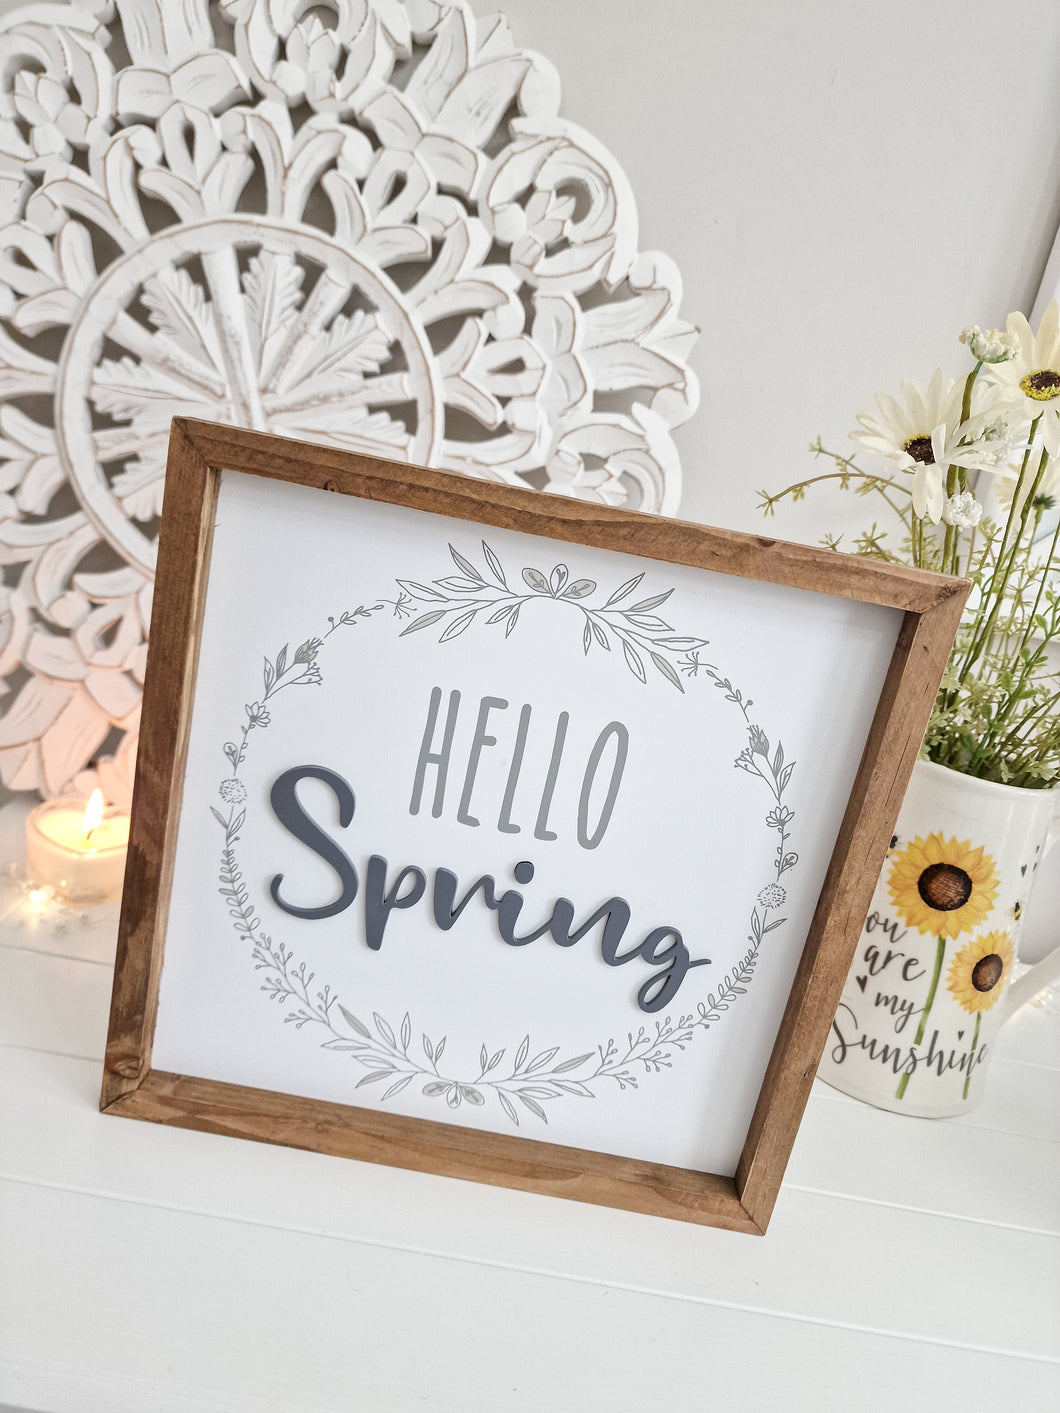 Hello Spring Neutral Toned Rustic Framed Wall Plaque